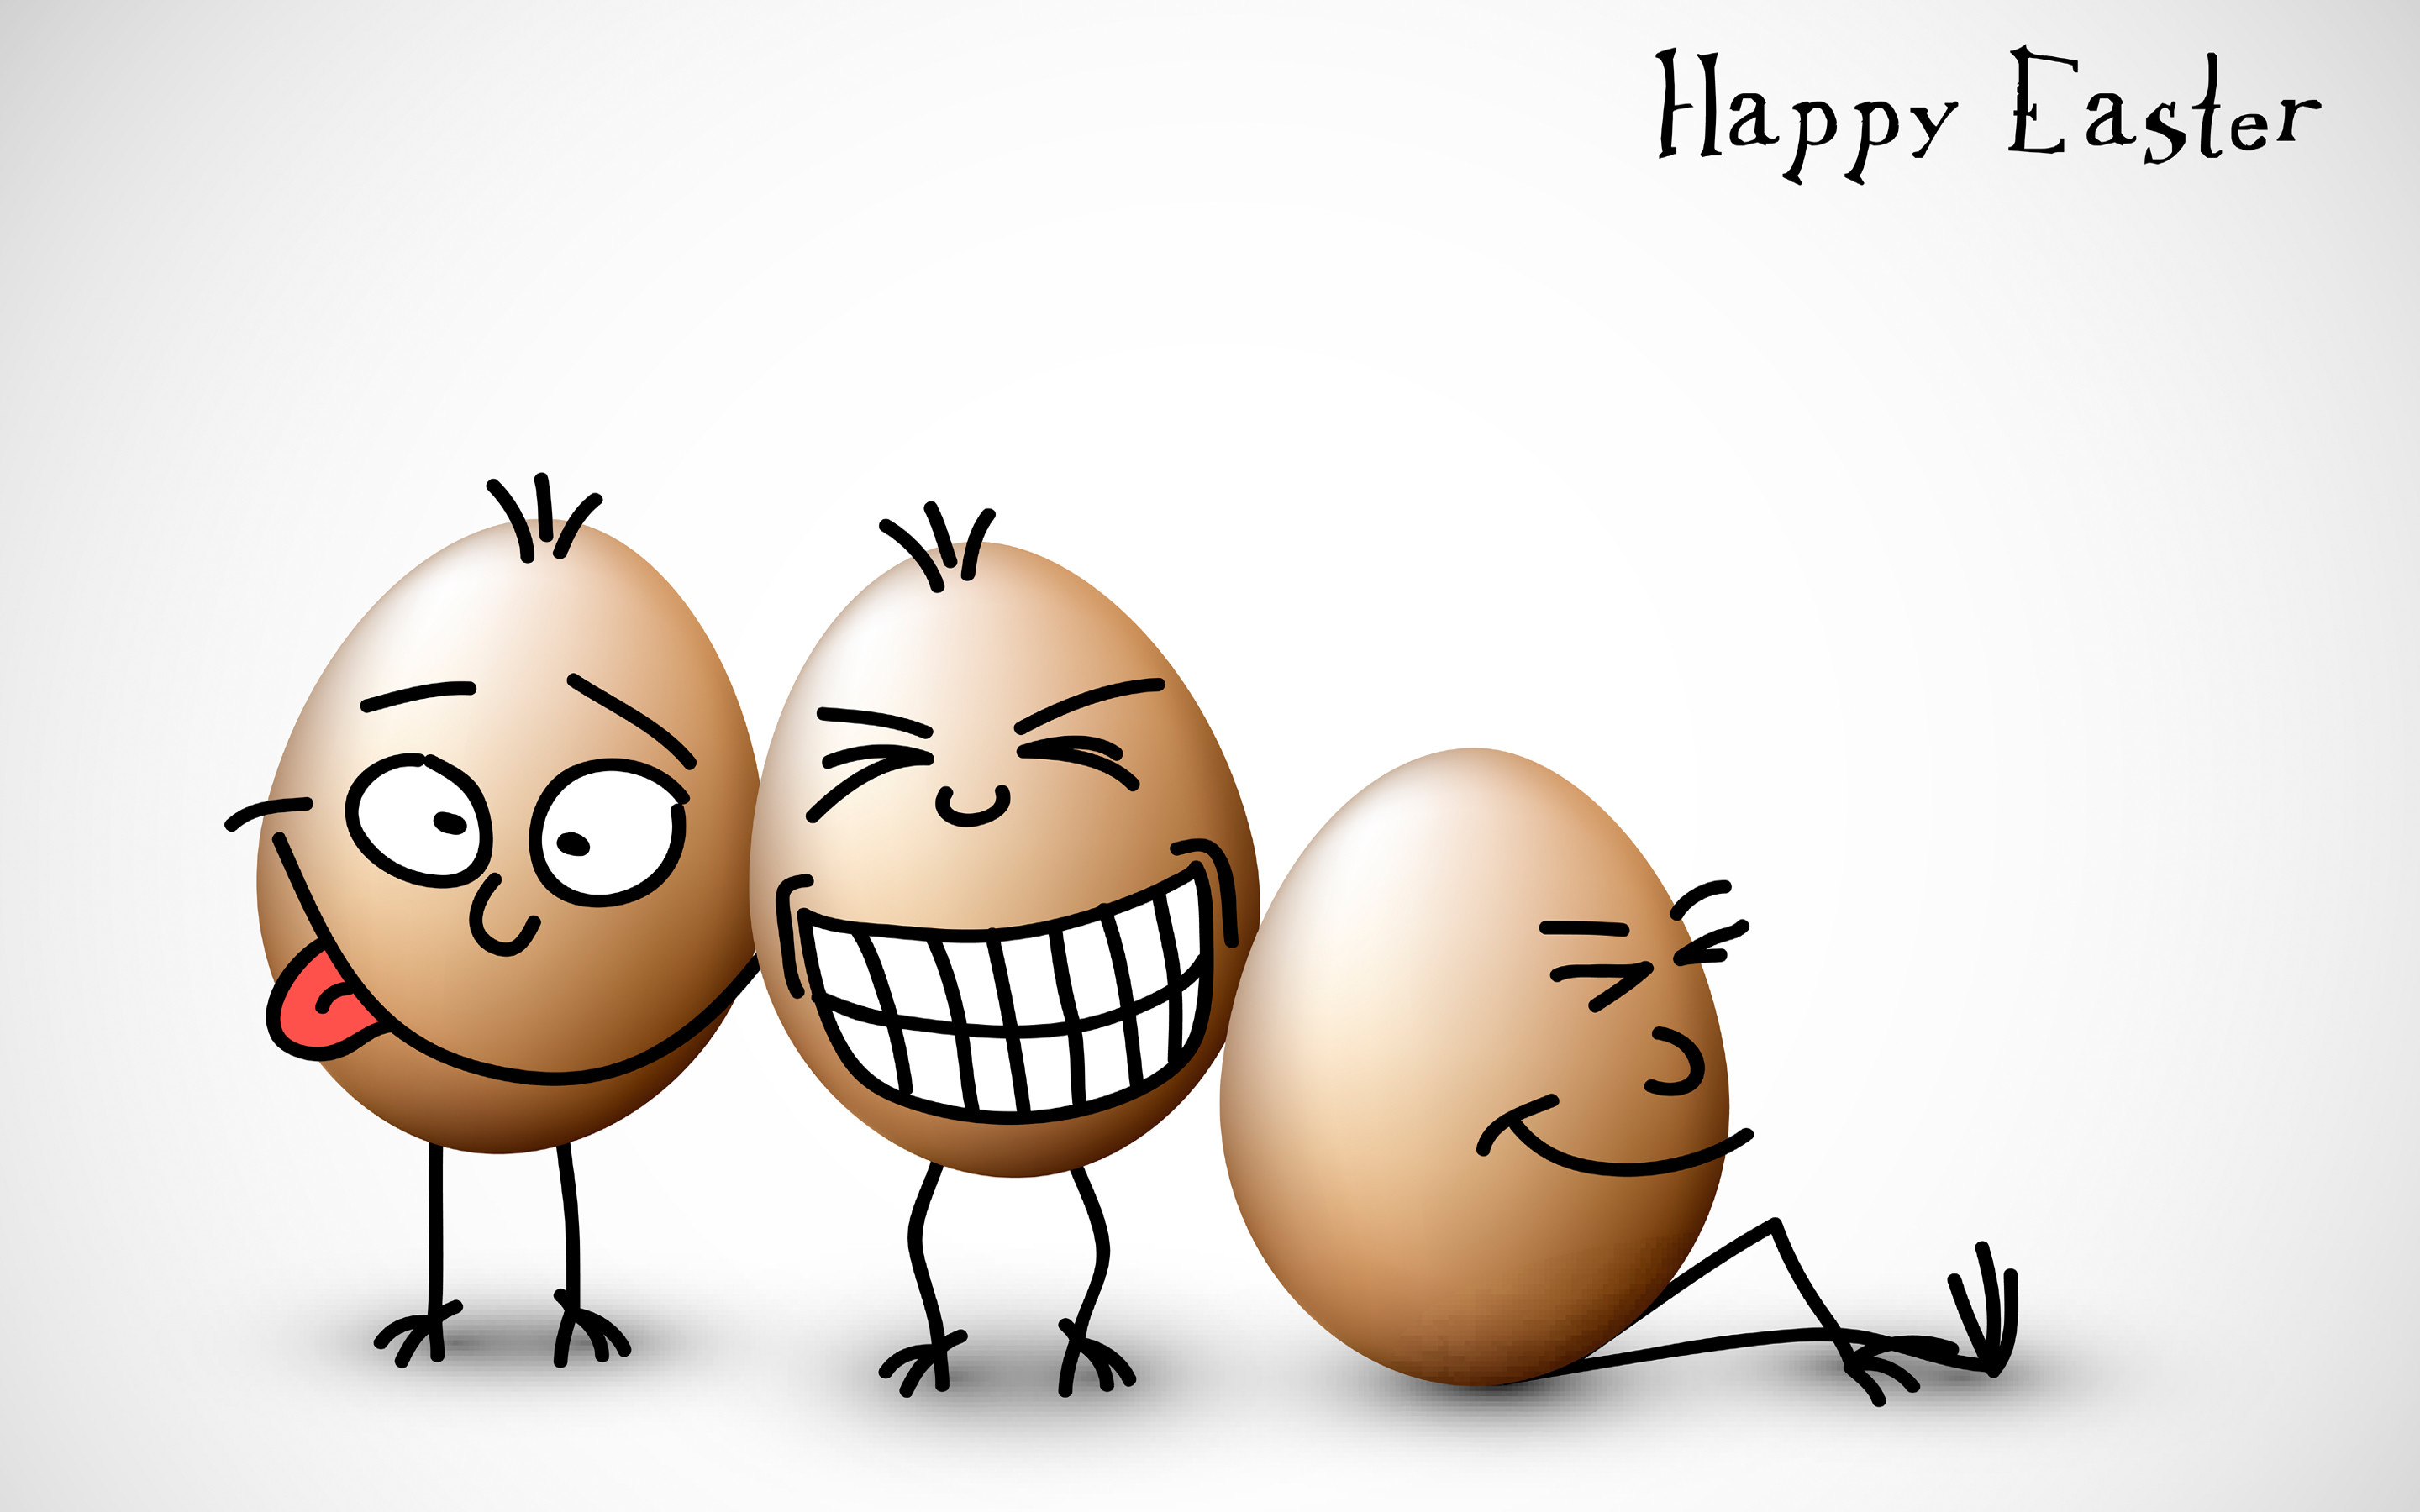 2880x1800, Funny Easter Wallpapers 
 Data Id 252124 - Happy Easter Wishes Funny - HD Wallpaper 